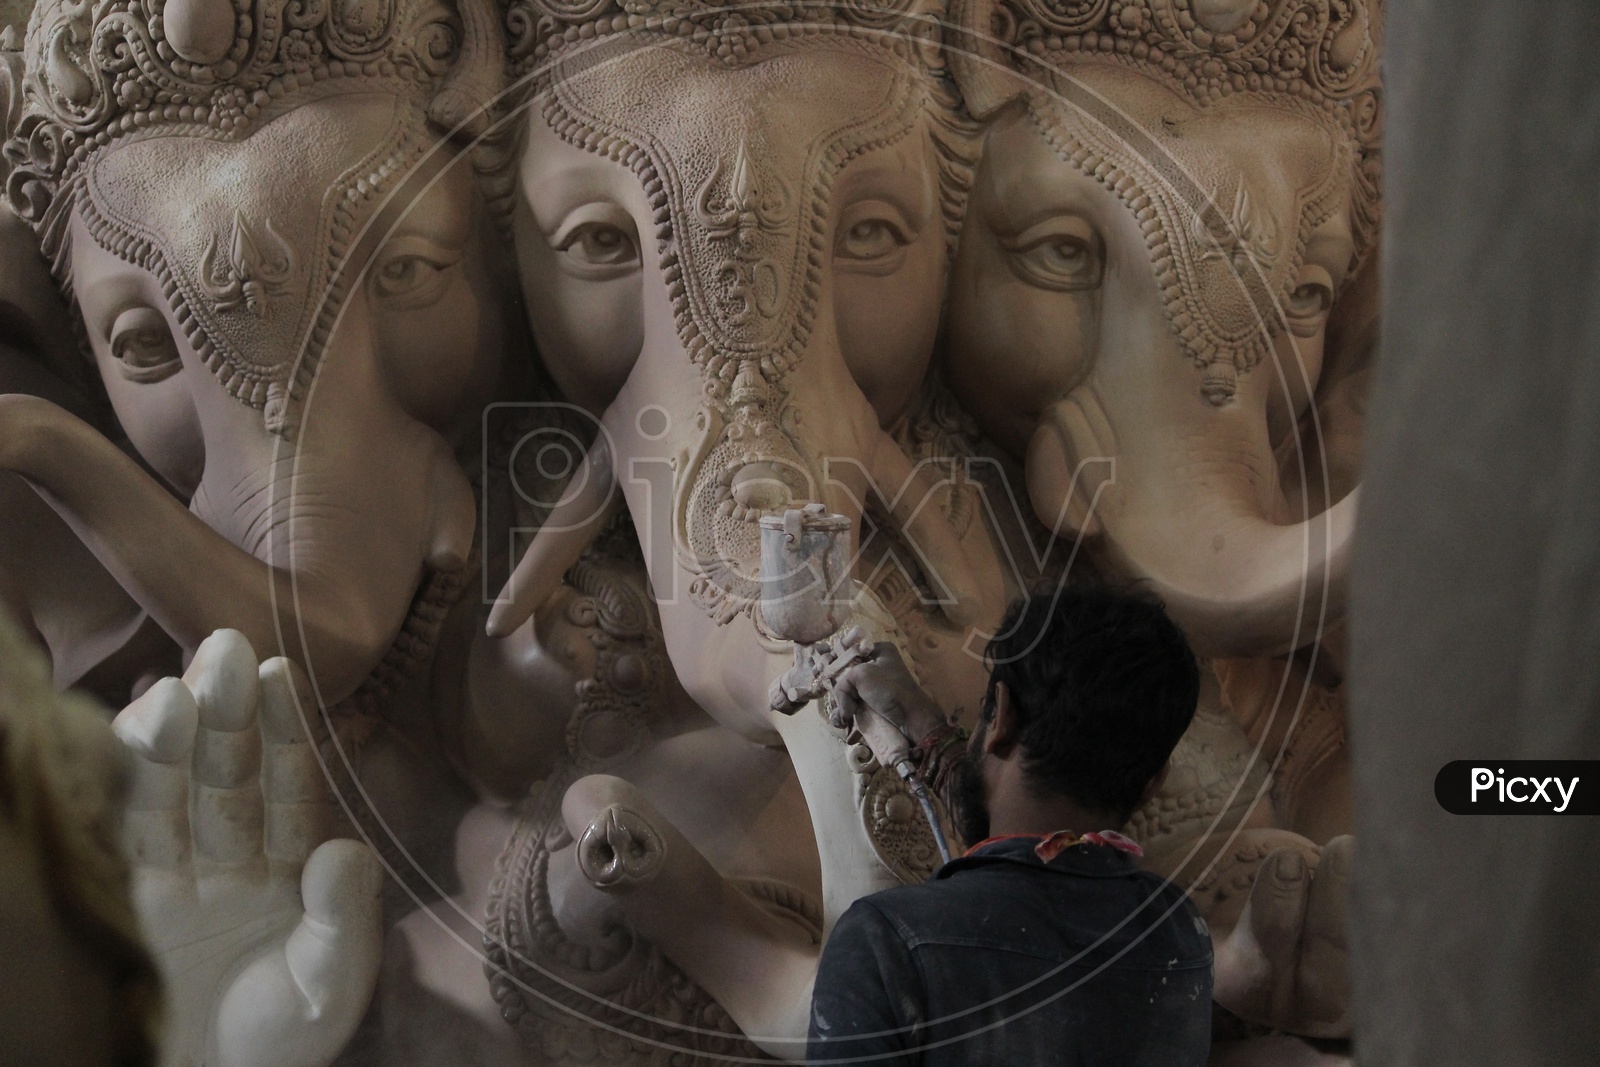 Man painting the lord ganesh statue.